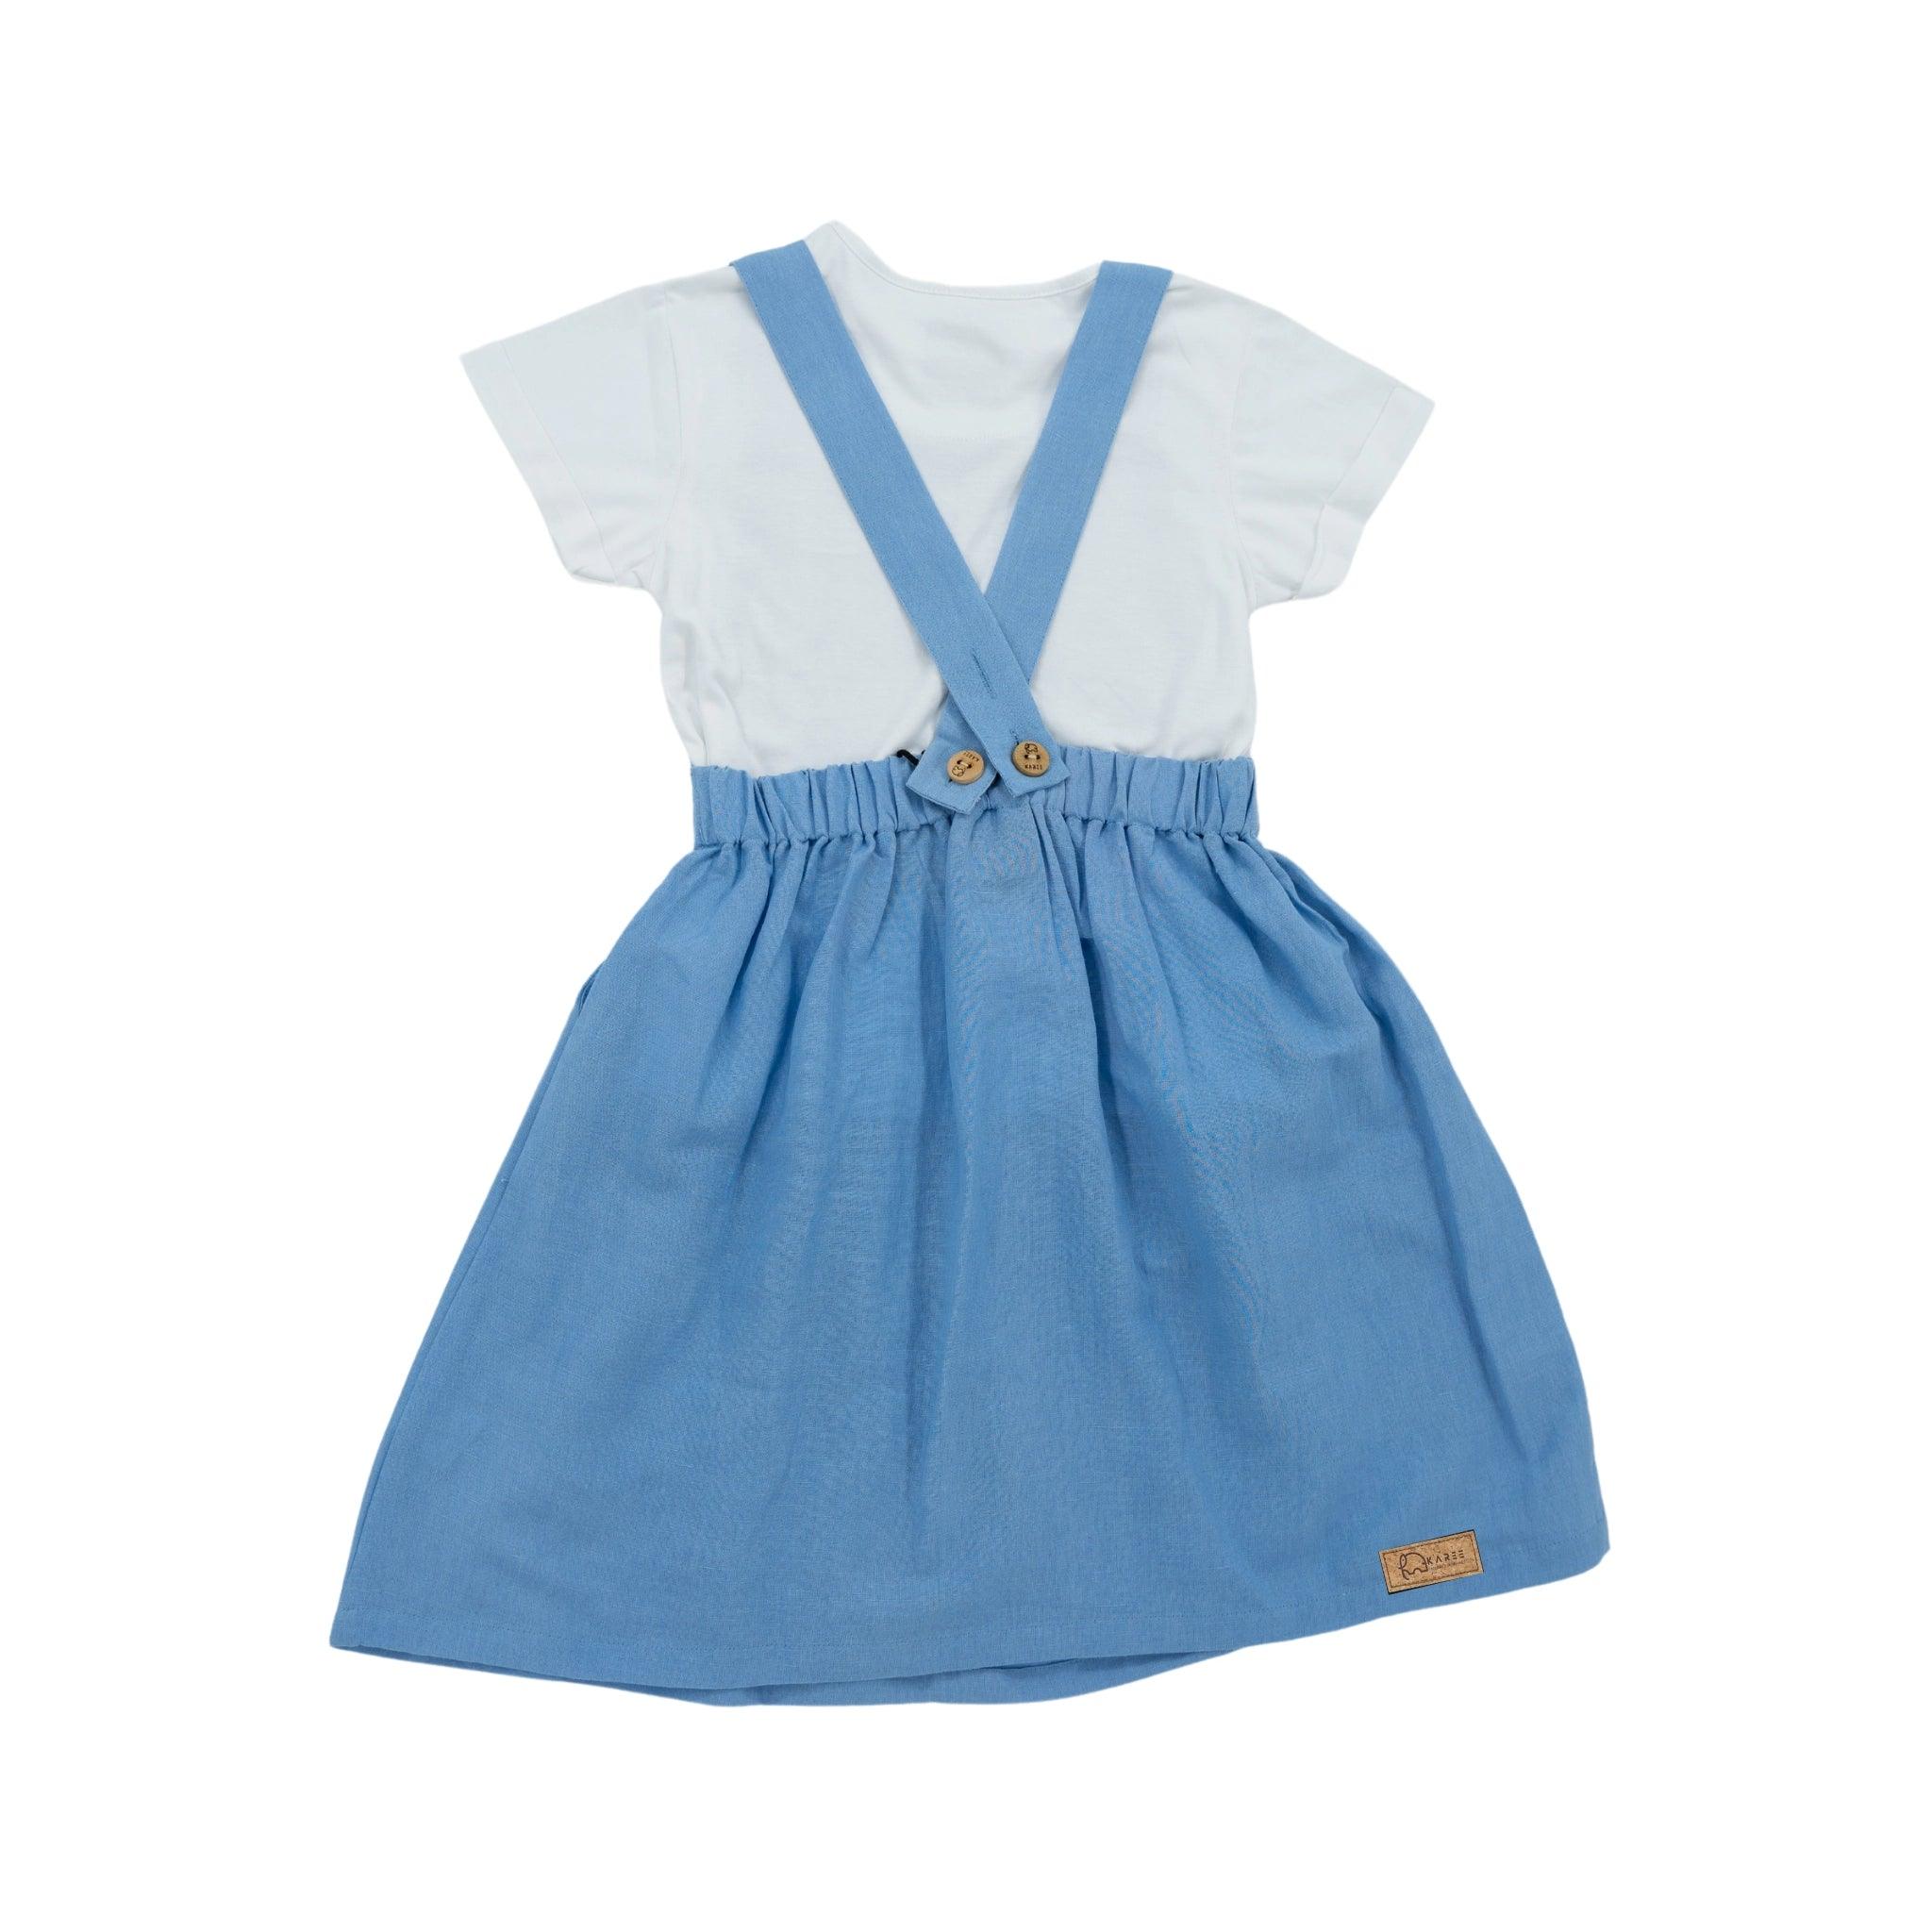 A toddler's Cerulean Blue Linen Pinafore dress with suspenders by Karee, displayed against a white background.